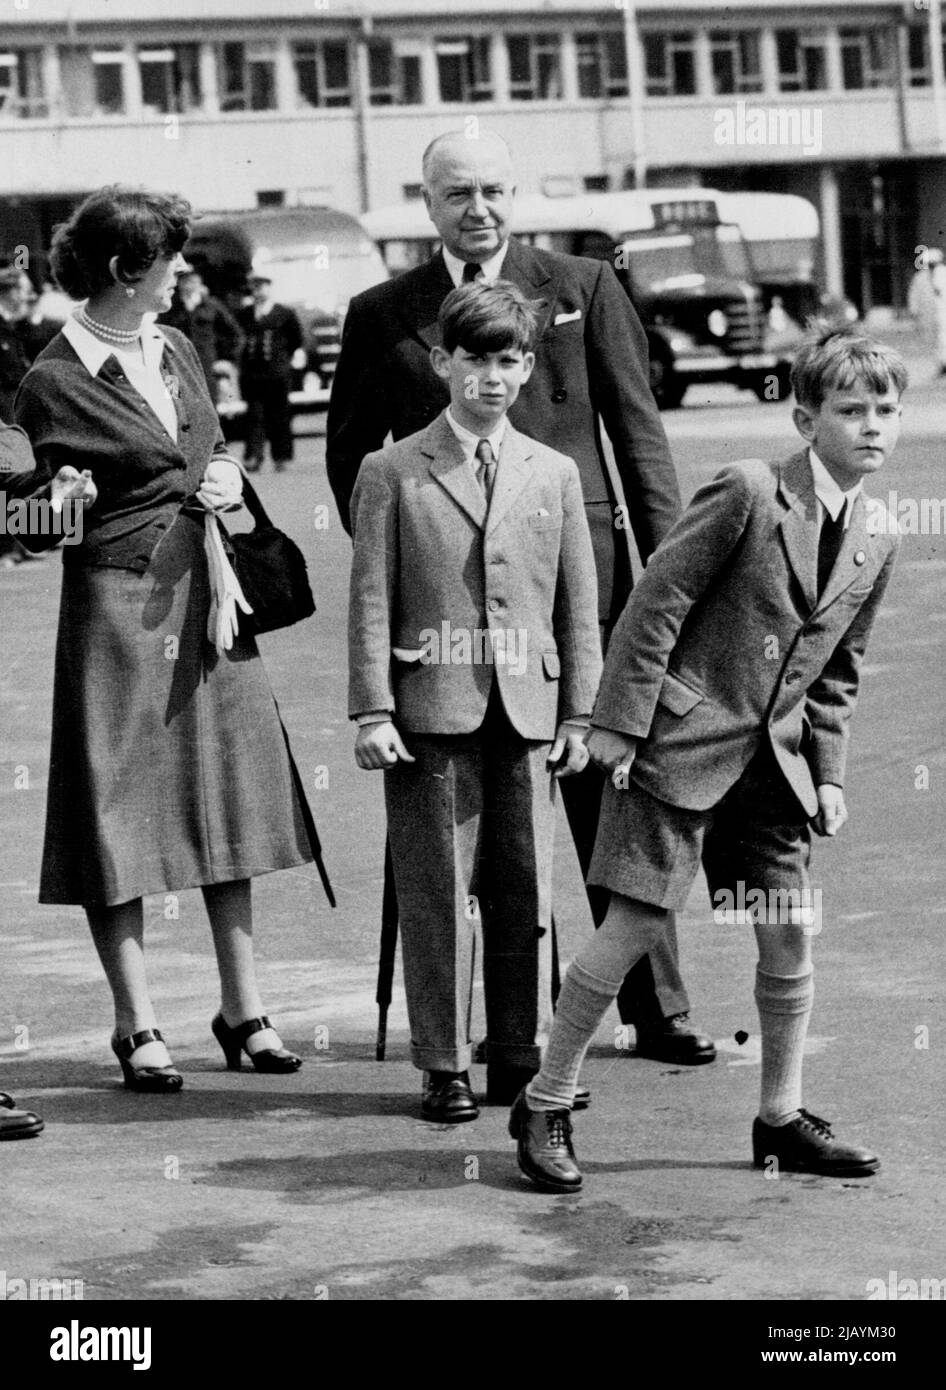 The Duke Of Edinburge Flies Through From Helsinki To Cowes -- The Duchess of Kent, wearing woollen cardigan, and no hat, waits with her son, Prince Michael and a little friend for the arrival of the Comet which brought the Duke of Edinburgh and her elder son, the Duke of Kent. HRH the Duke of Edinburgh arrived back from Helsinki by comet jet air liner this morning. At London, and from there went to Cowes to compete in the racing in his yacht, Coweslip. August 05, 1952. (Photo by Fox Photos). Stock Photo